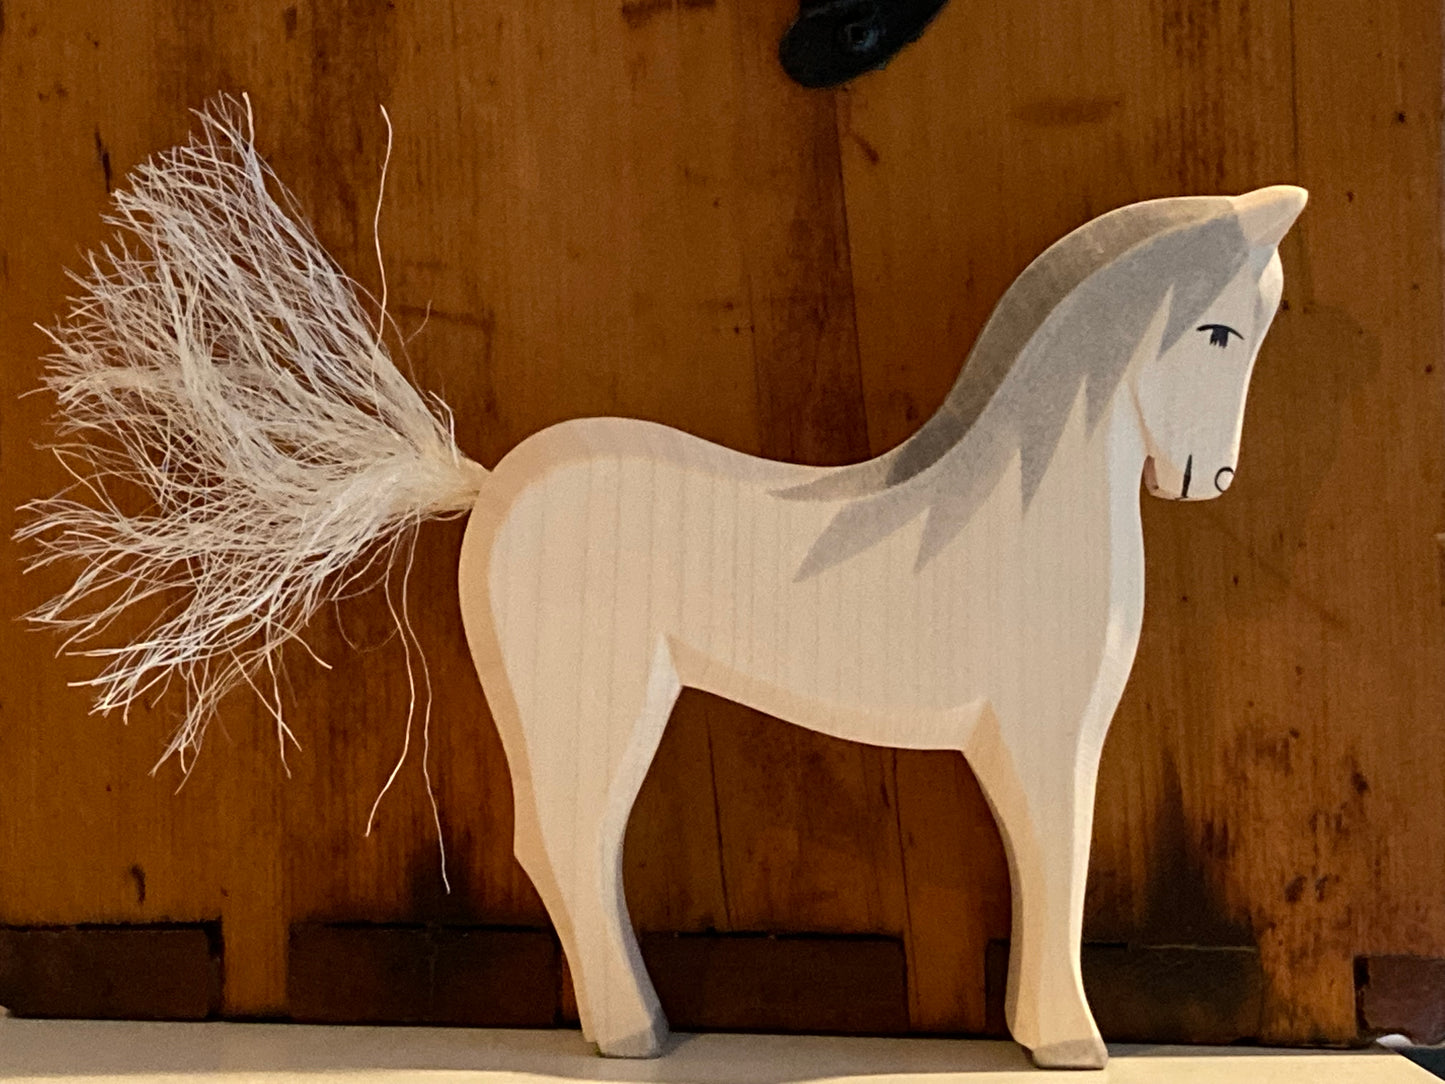 Wooden Dollhouse Play - HORSE, WHITE